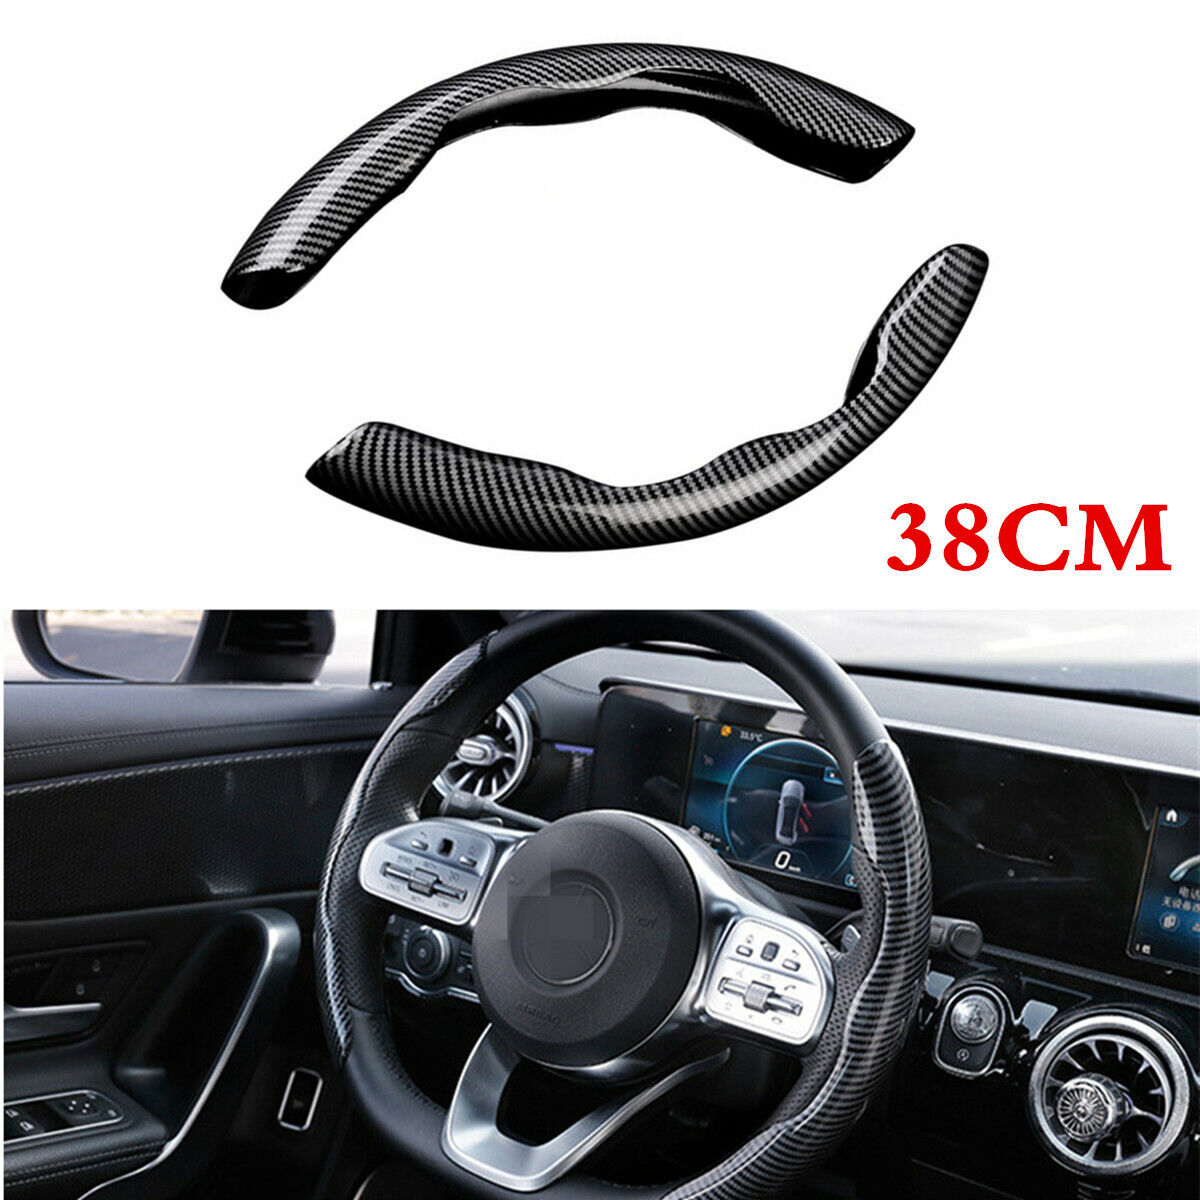 2x Steering Wheel Booster Cover Built-in Decrease Stress Button Fit For 38CM Car